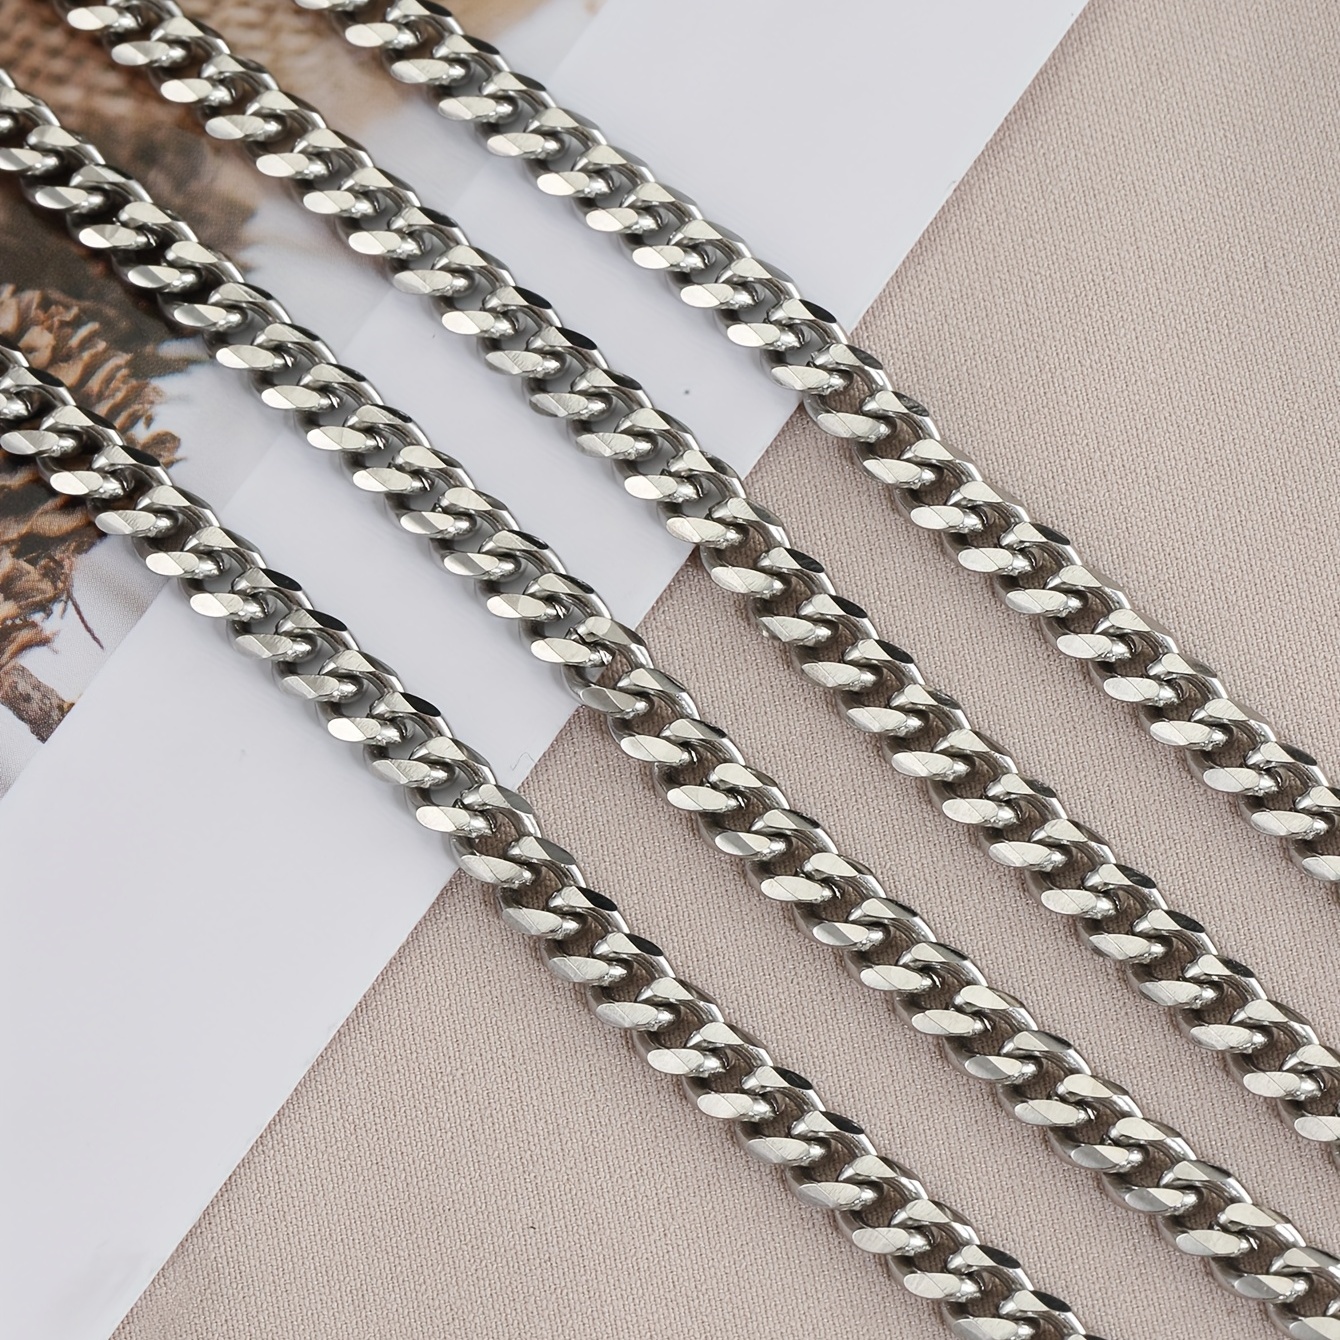  UMAOKANG Stainless Steel Jewelry Chains for Jewelry Making,  Double Layered Twist Curb Chain Bulk Men and Women Silver Necklace Bracelet  Chain DIY Jewelry Supplies : Arts, Crafts & Sewing